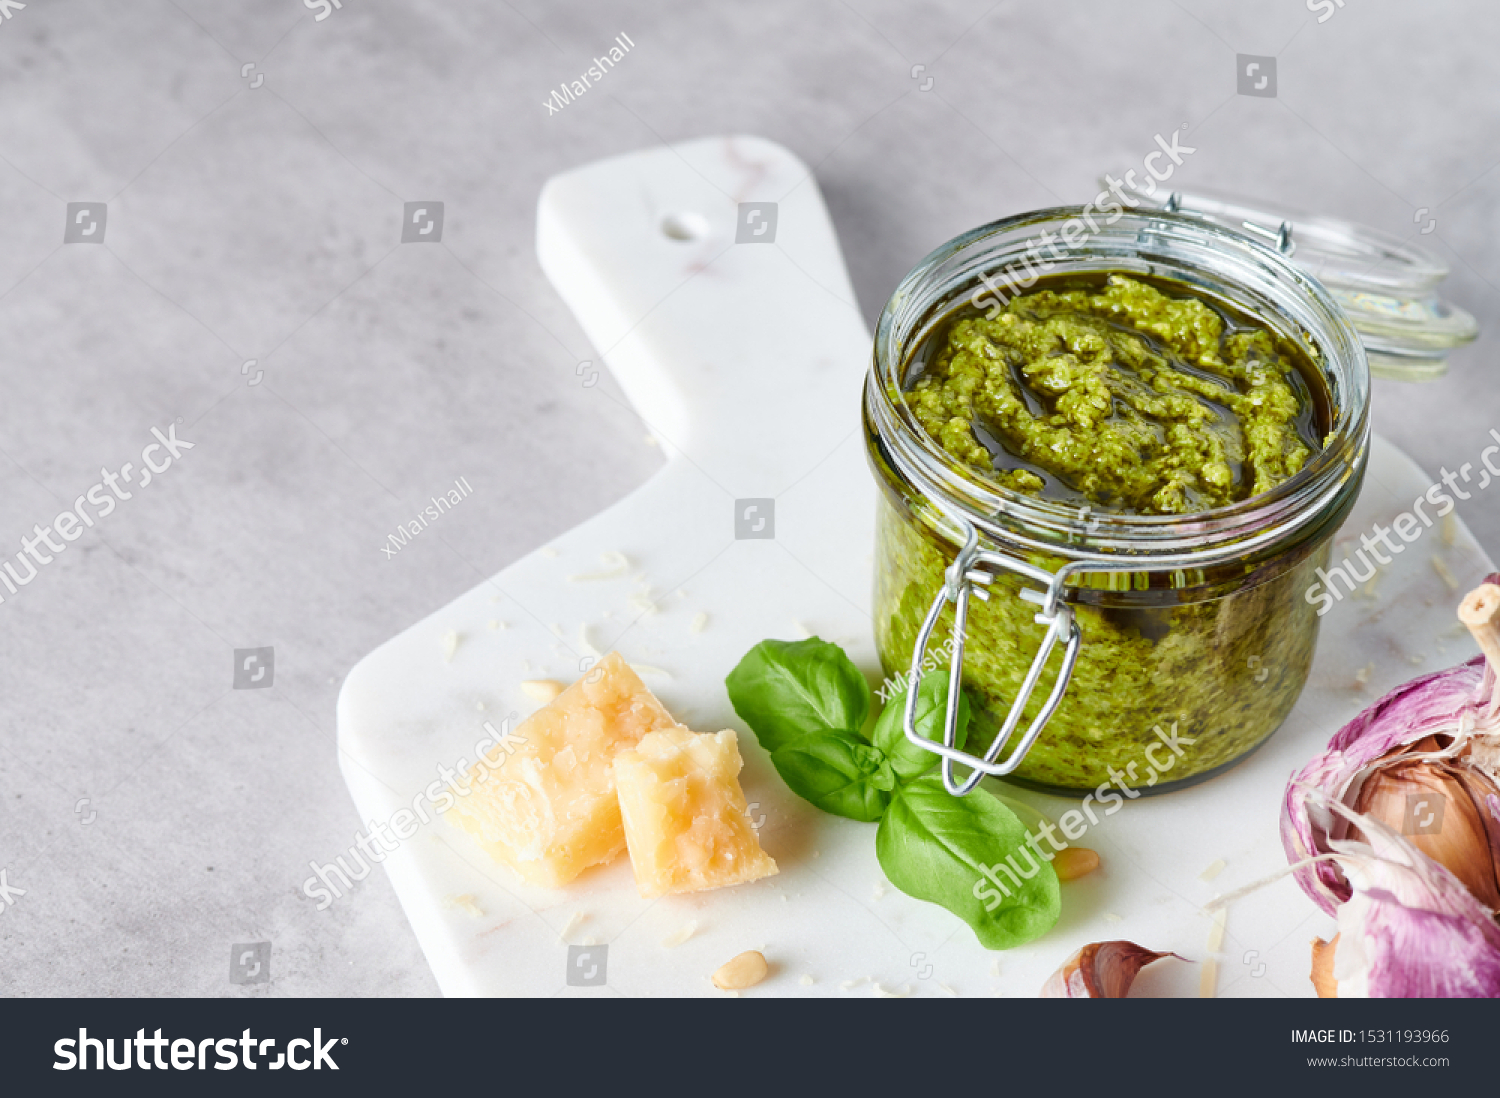 Pesto sauce or pesto genovese in a glass jar with pine nuts, parmesan, basil, oil and garlic on white marble cutting board. Copy space. #1531193966